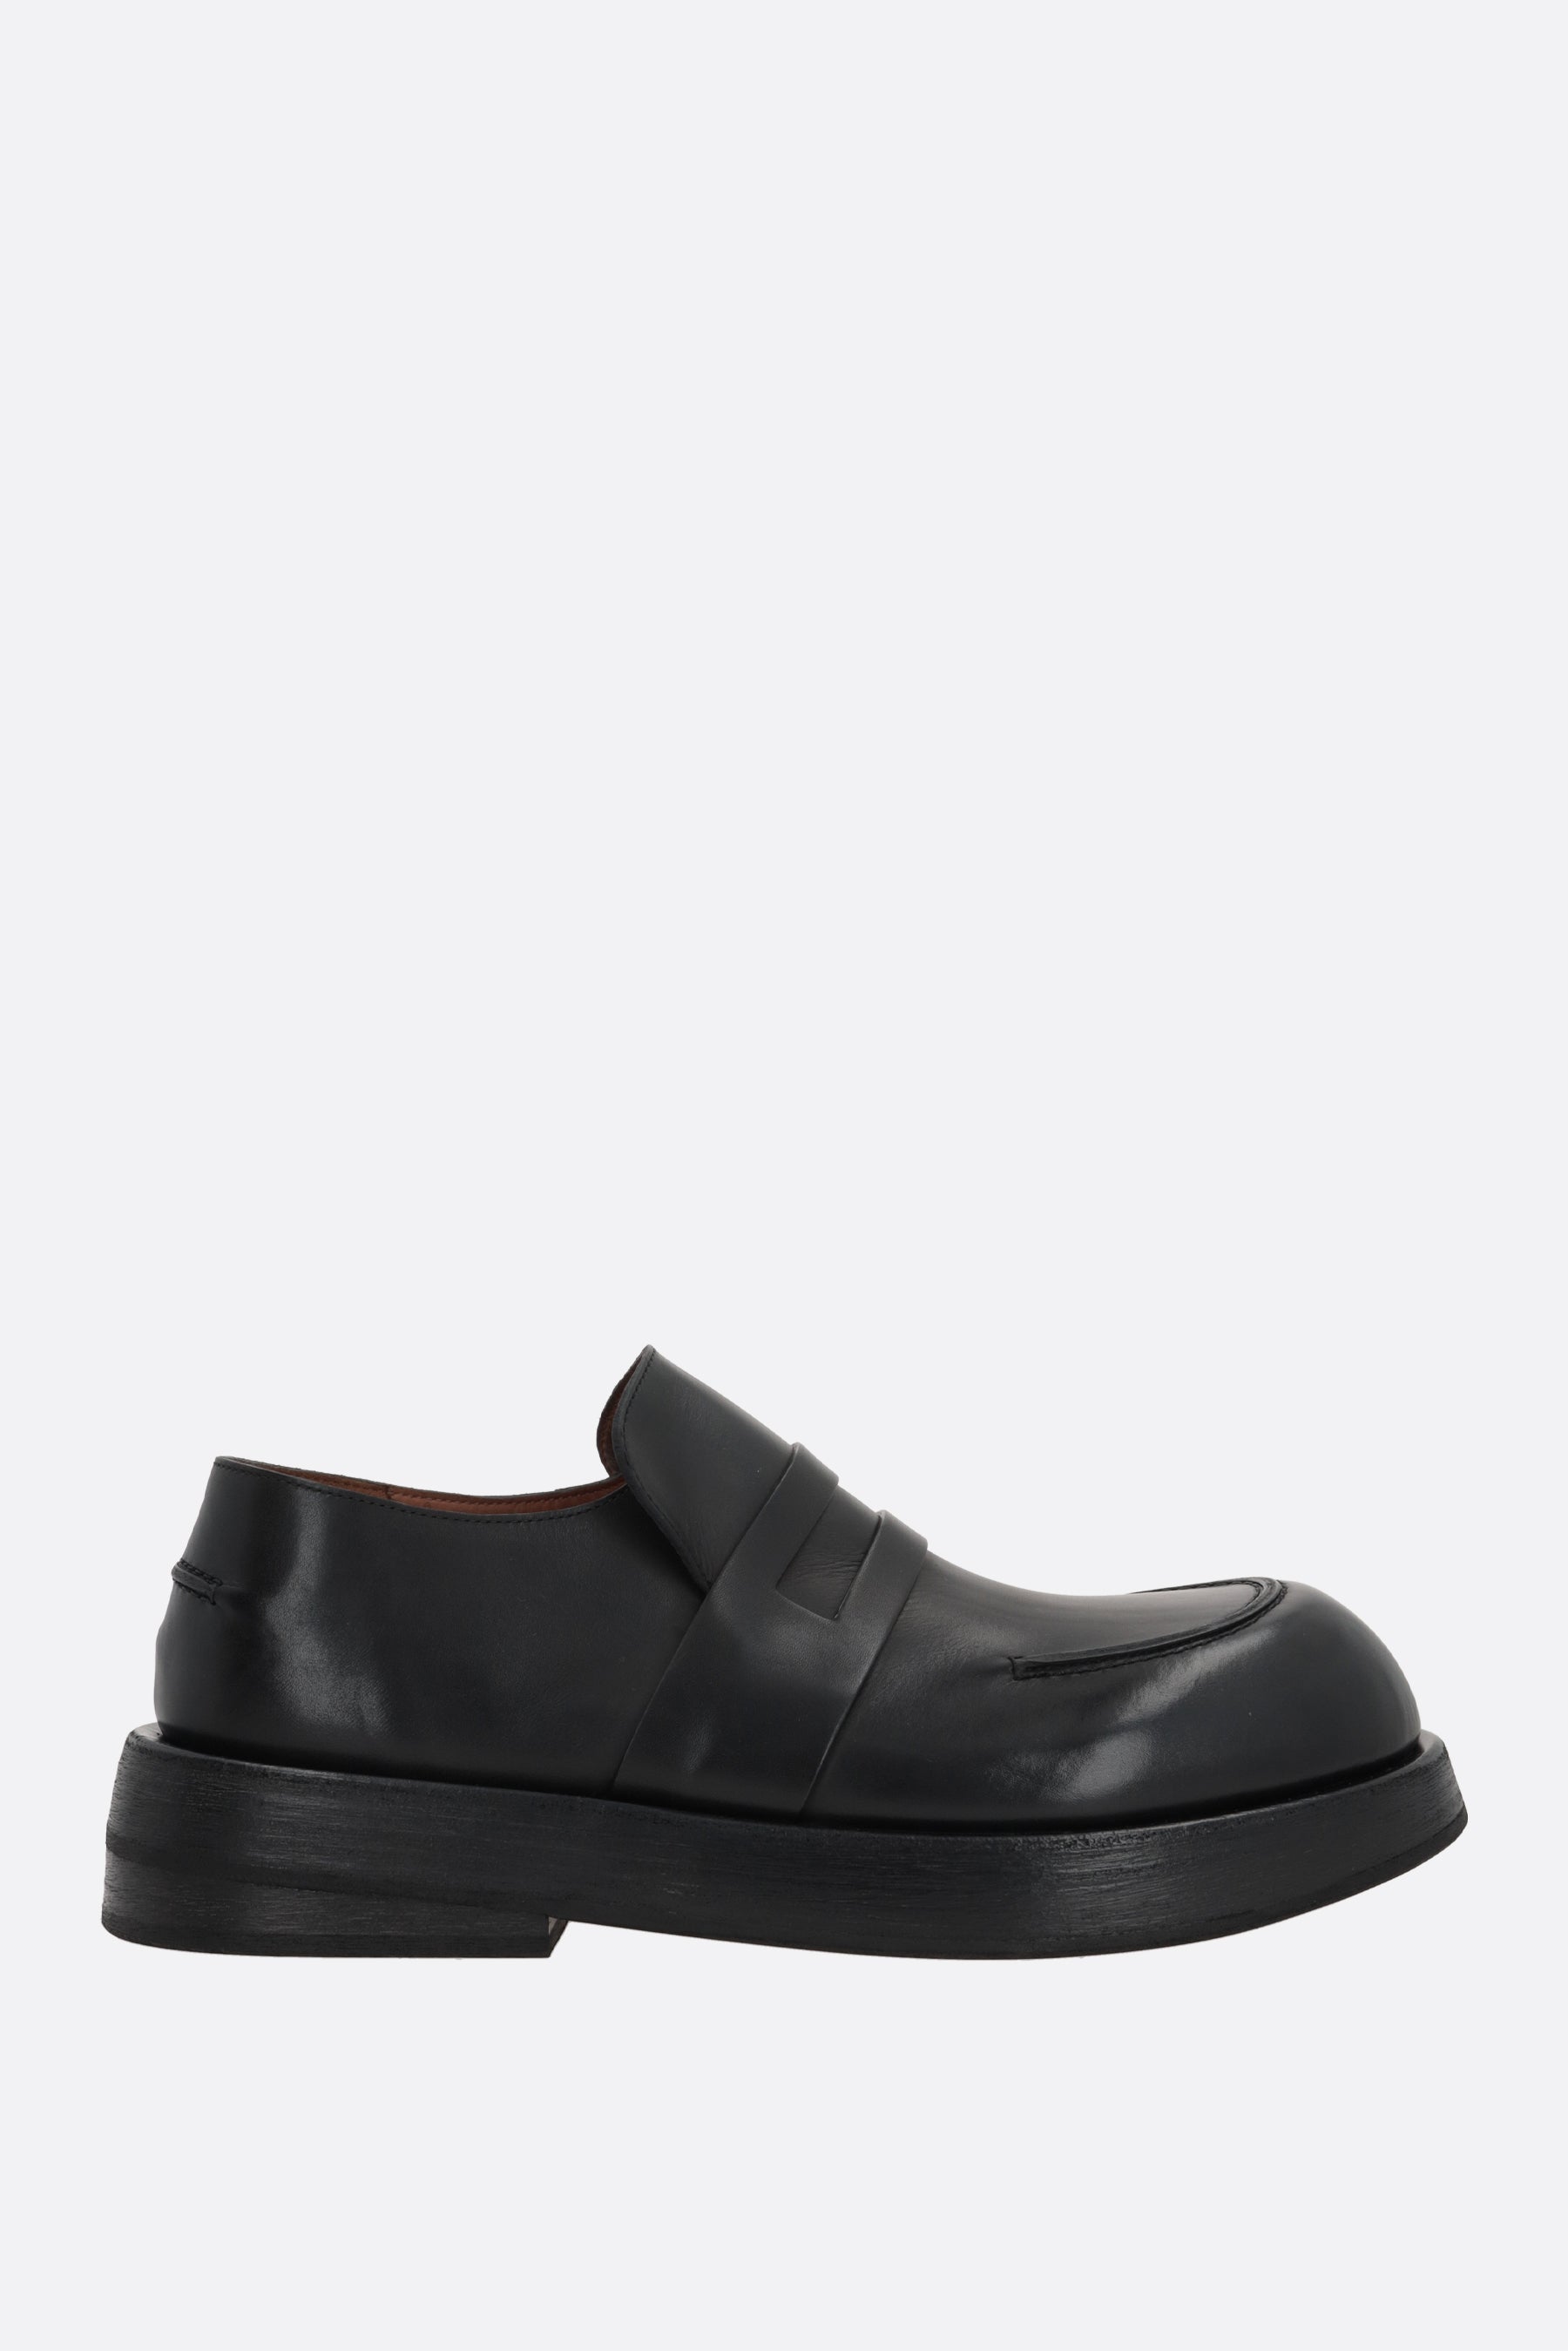 Musona smooth leather loafers